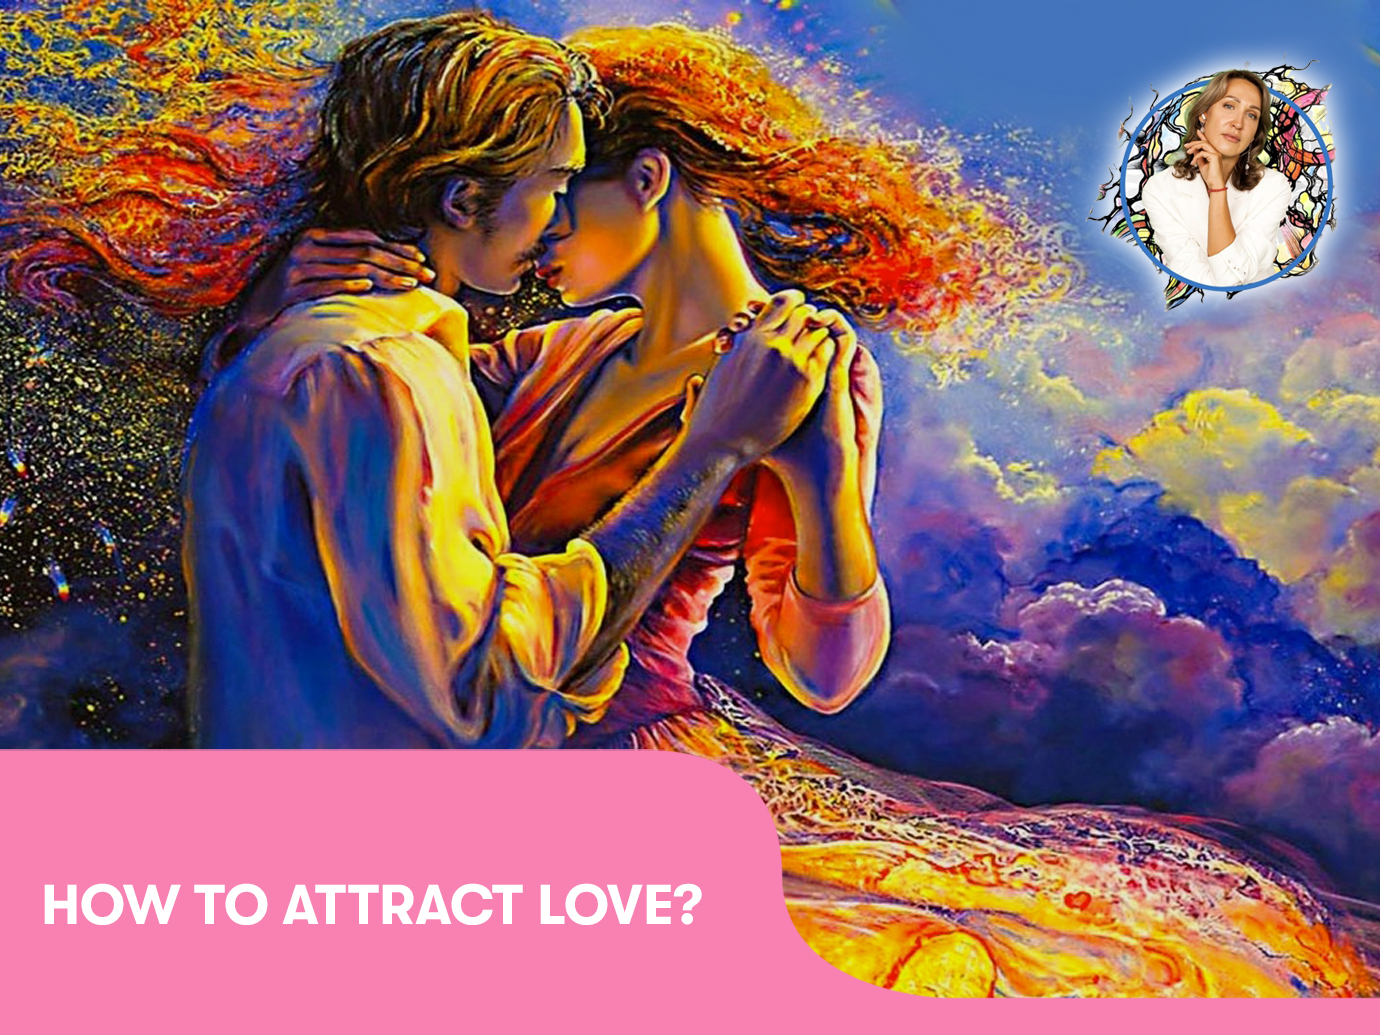 How to attract love?